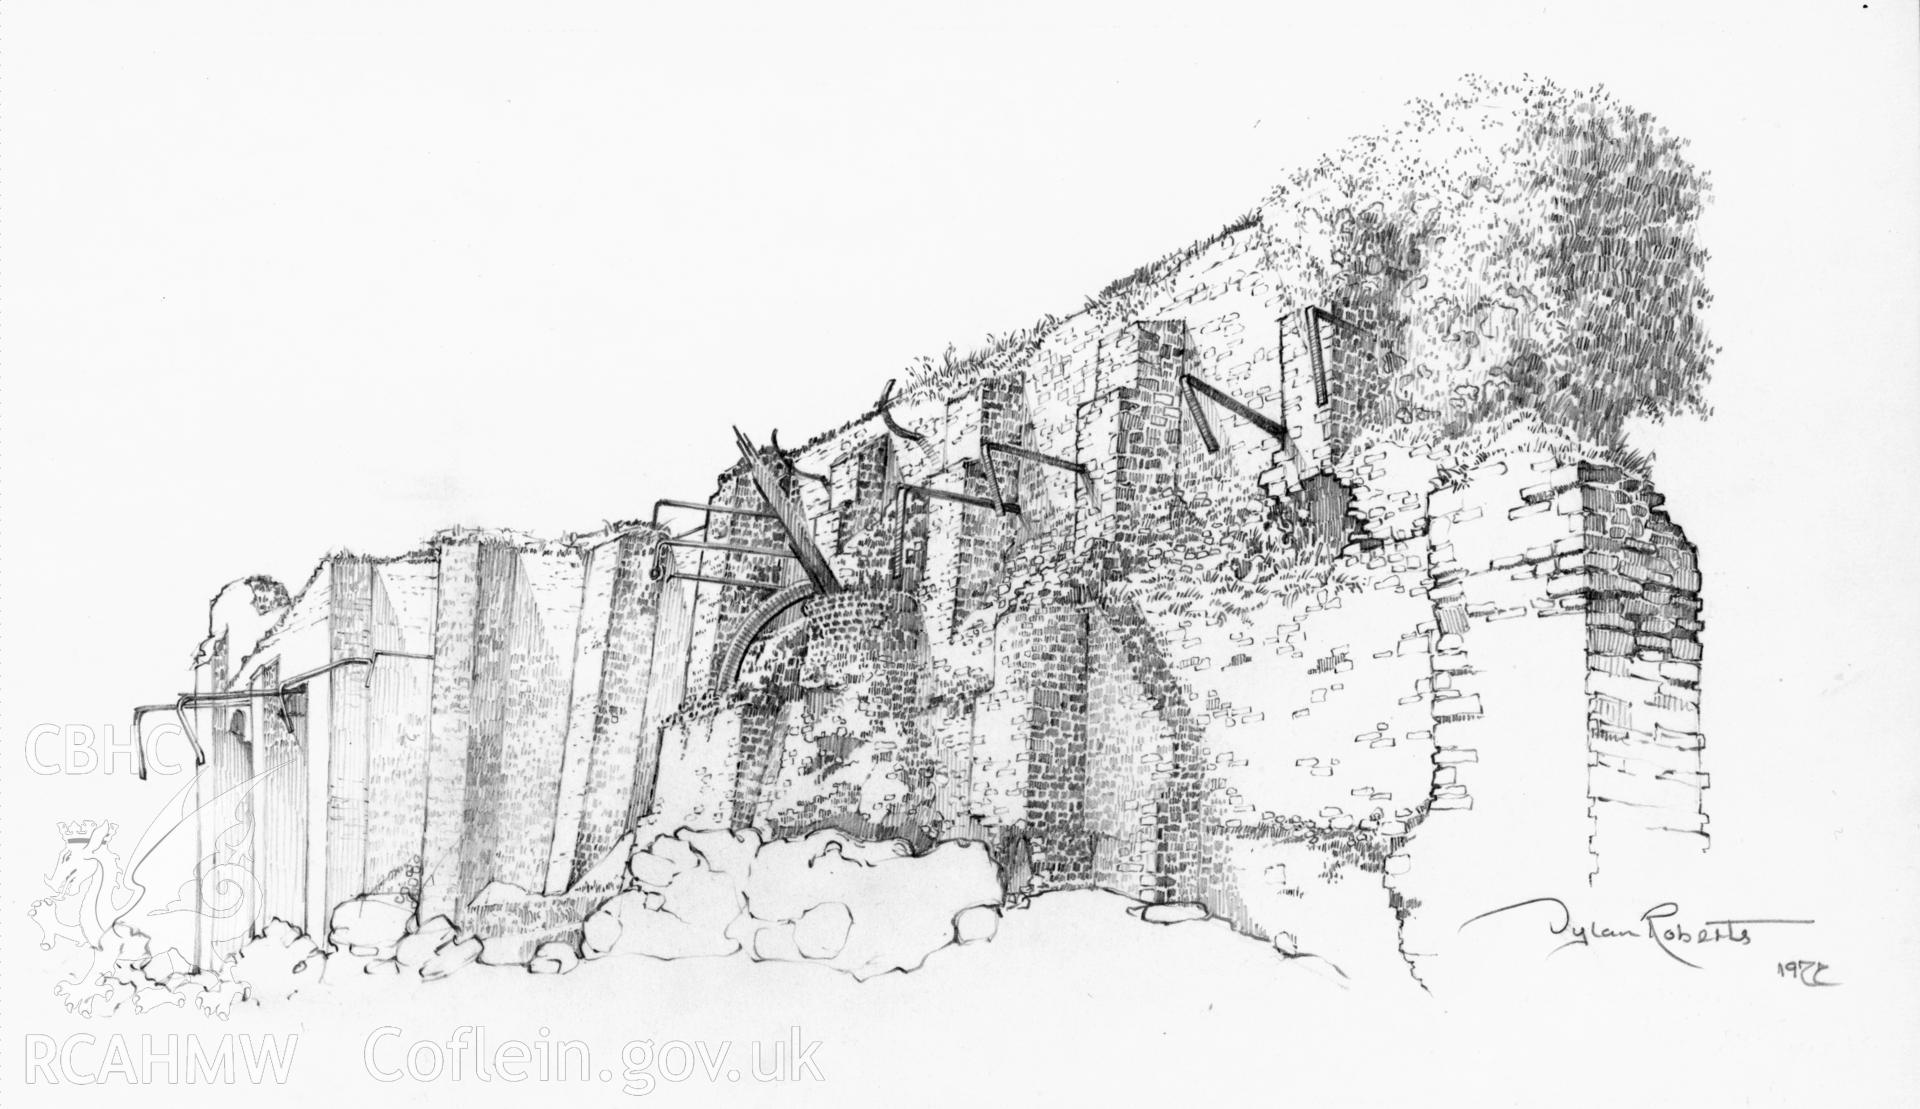 Pencil sketch of the charging bank at Ynysgedwyn Iron Works, produced by Dylan Roberts, 1977.